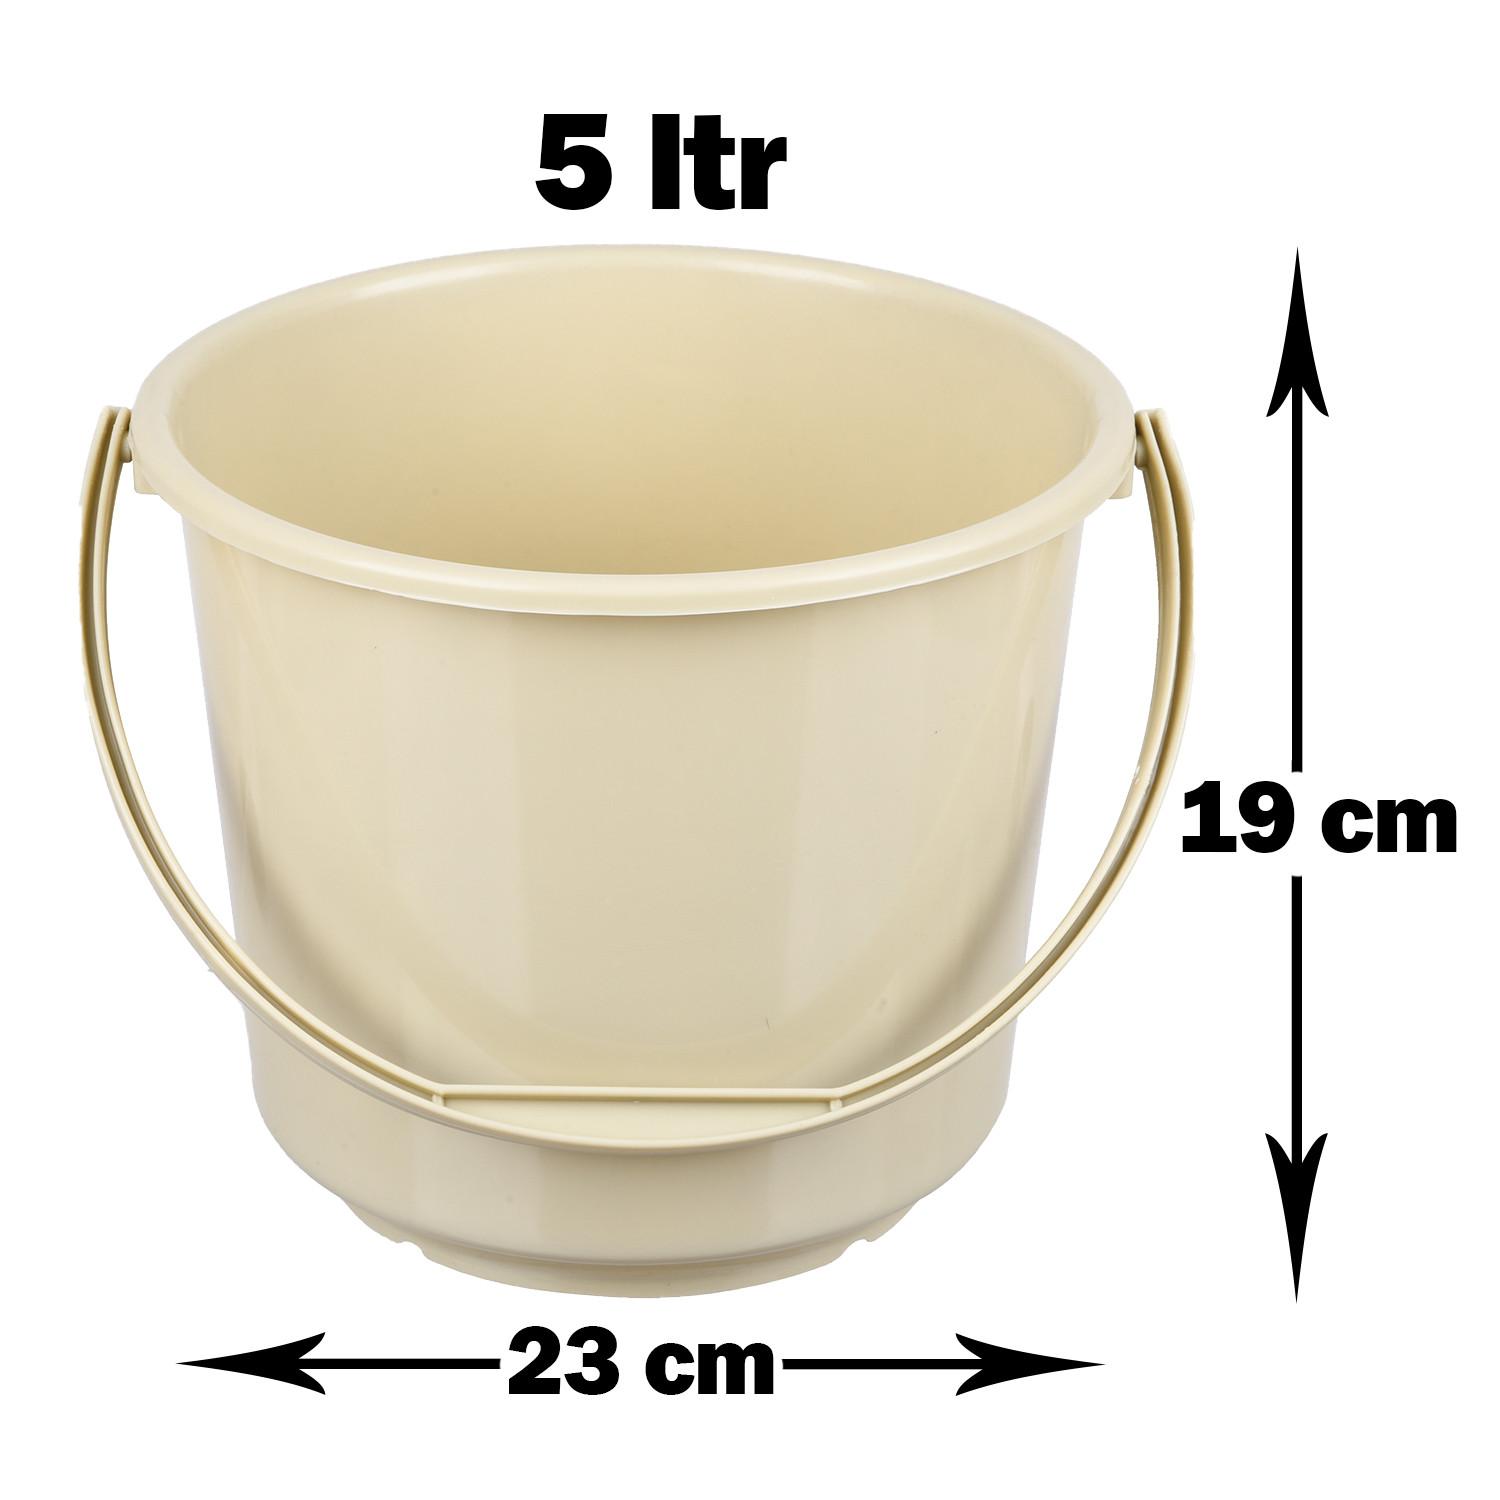 Kuber Industries Bucket | Plastic Bucket for Mopping | Bucket for Cleaning | Storage Container Bucket | Water Storage Bucket | Bathroom Bucket | Plain Bucket | 5 LTR | Pack of 2 | Multi